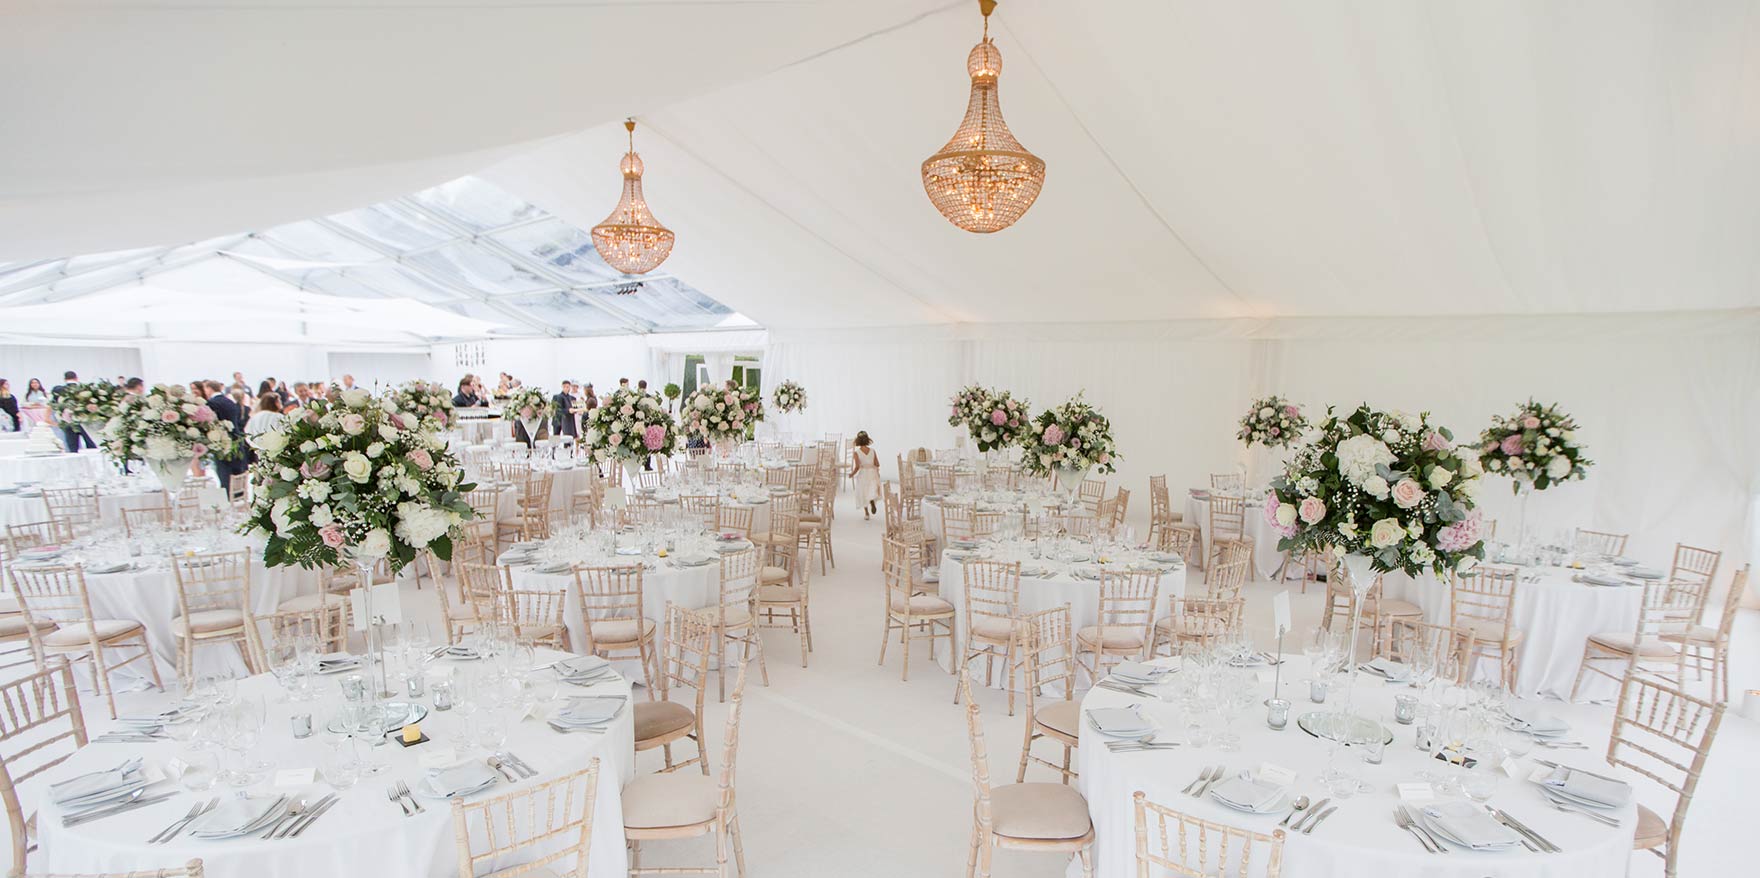 Wedding with white linings for marquee hire with copper effect chandeliers and large floral arrangements to circular table centres